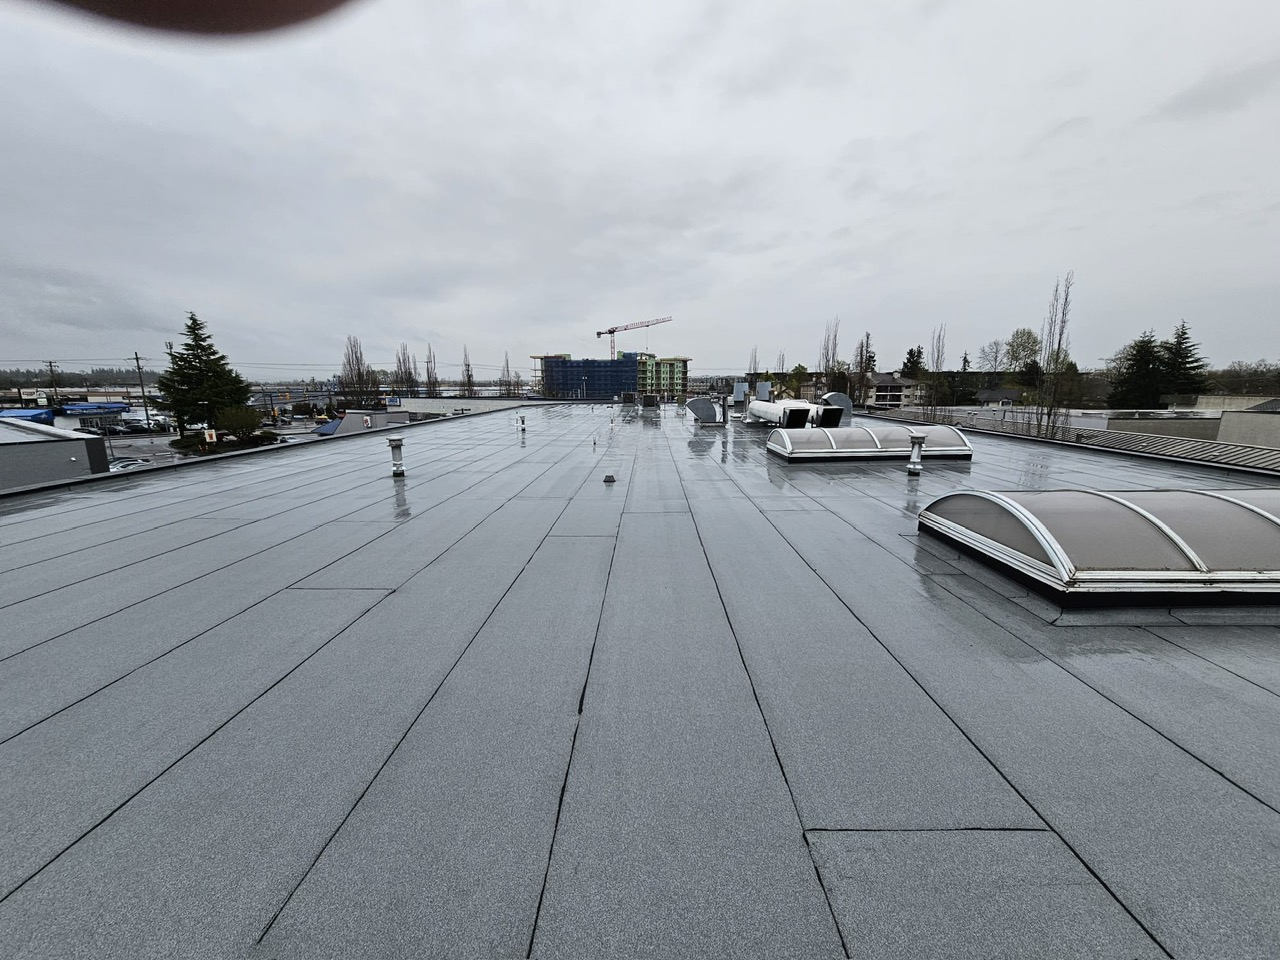 New multi building commercial flat roof